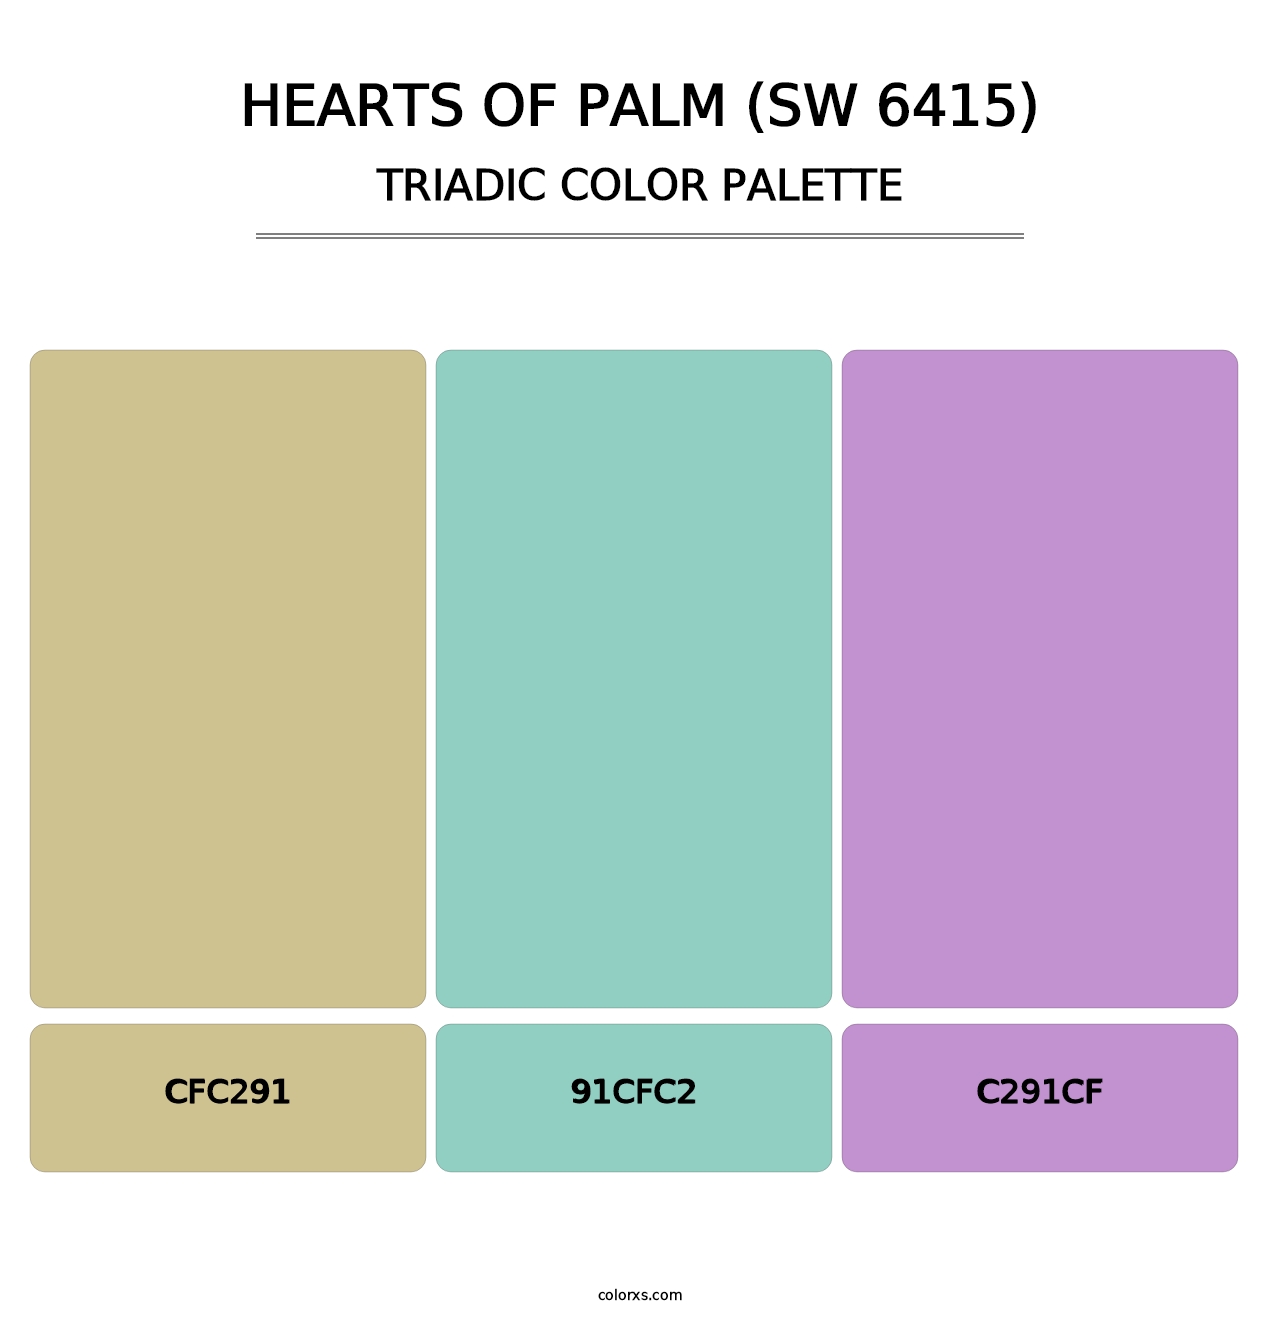 Hearts of Palm (SW 6415) - Triadic Color Palette